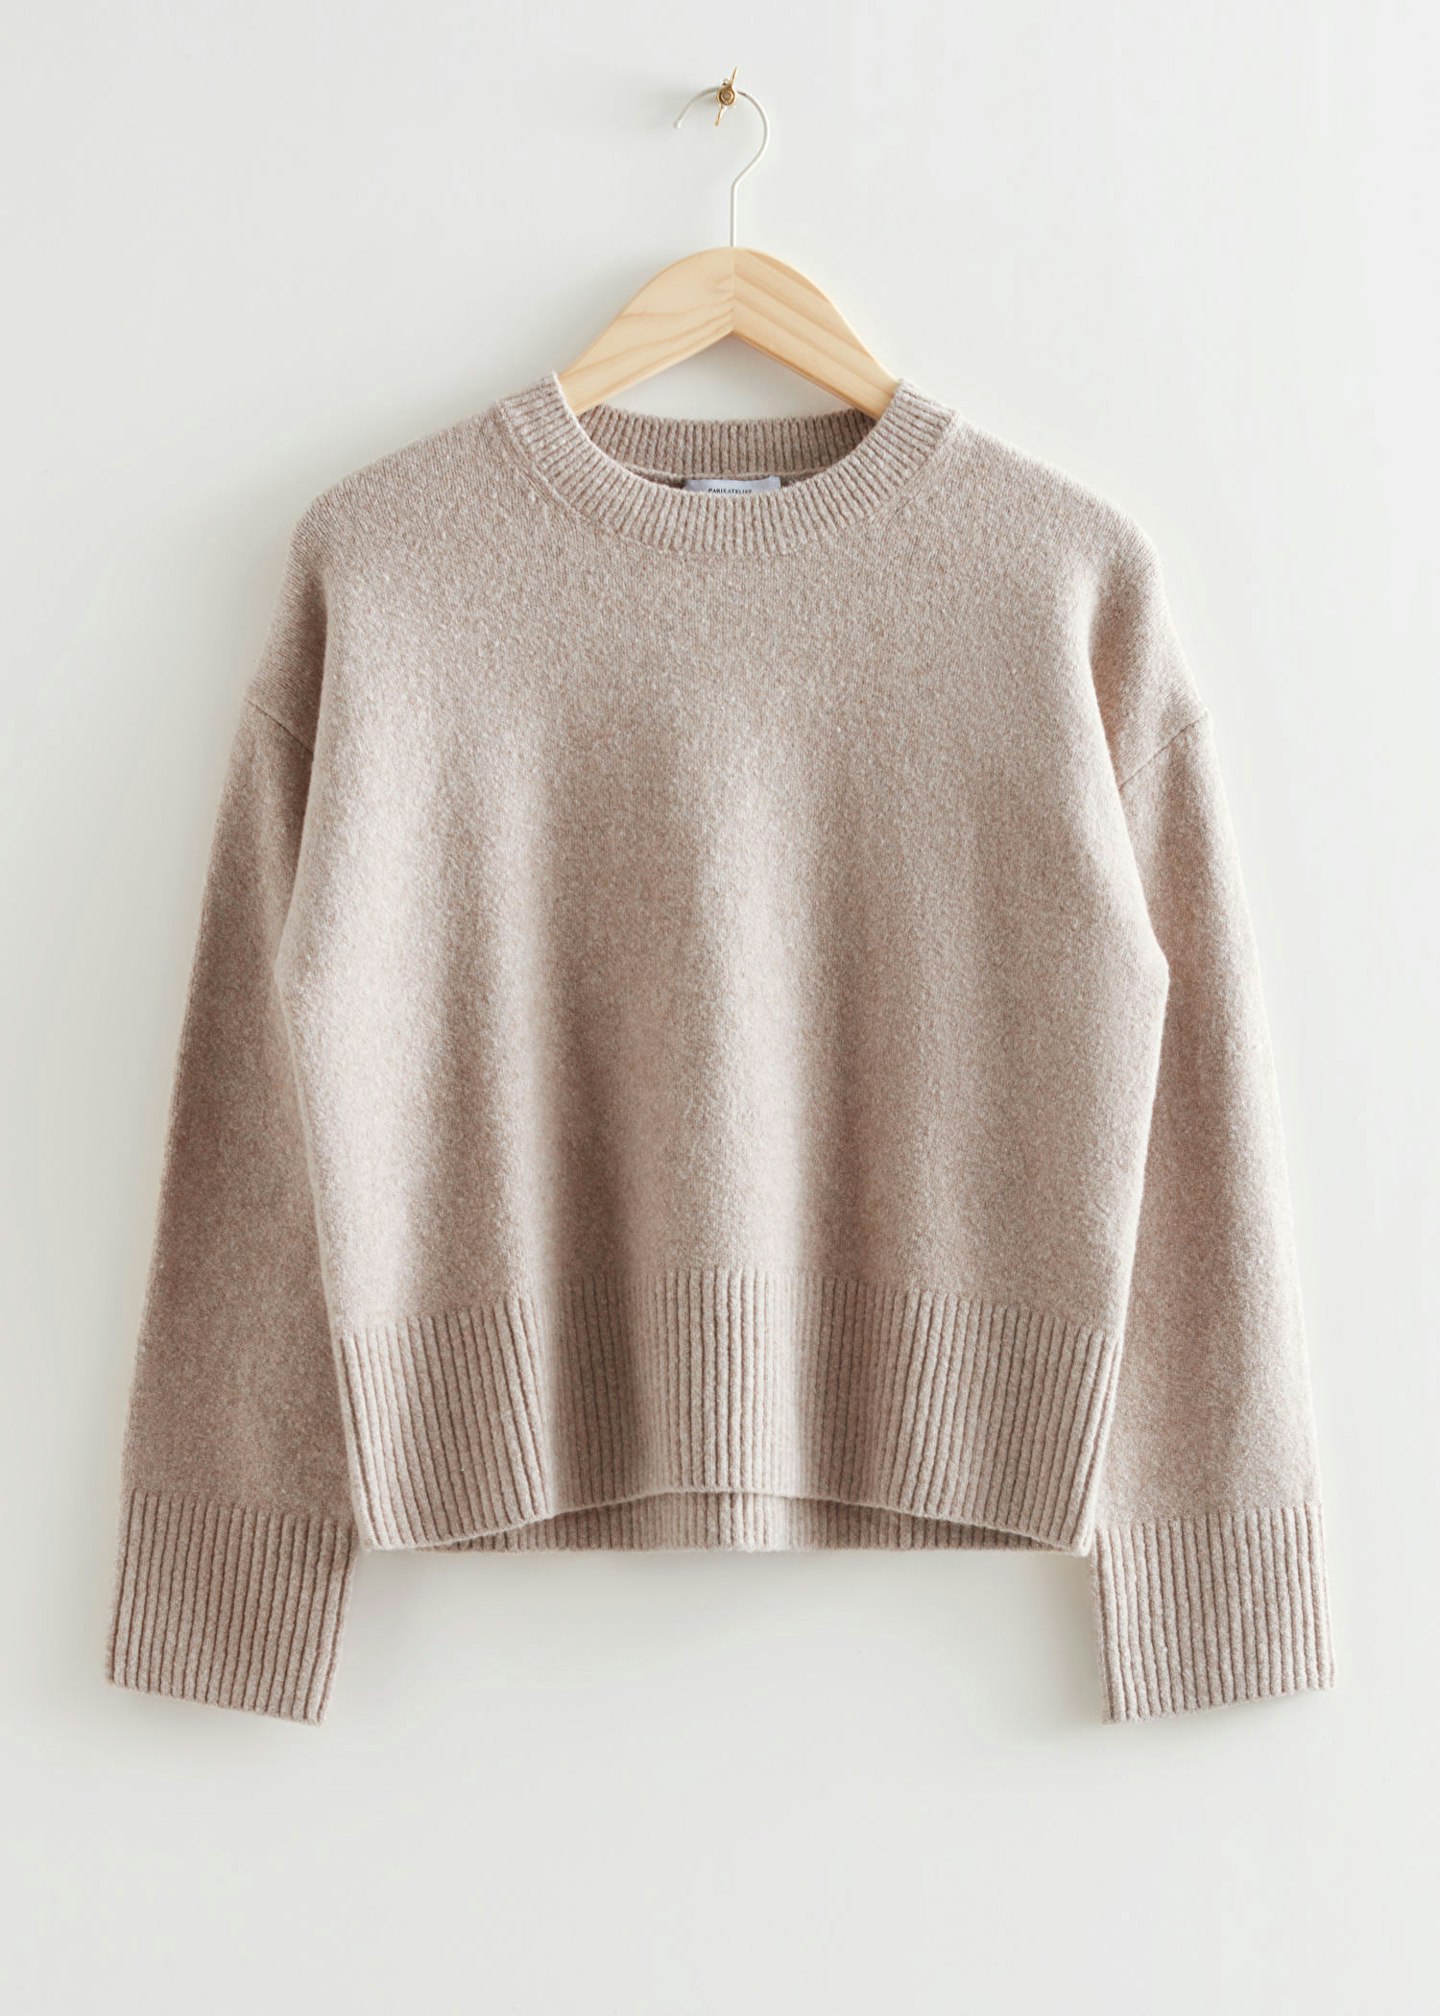 & other stories jumper 